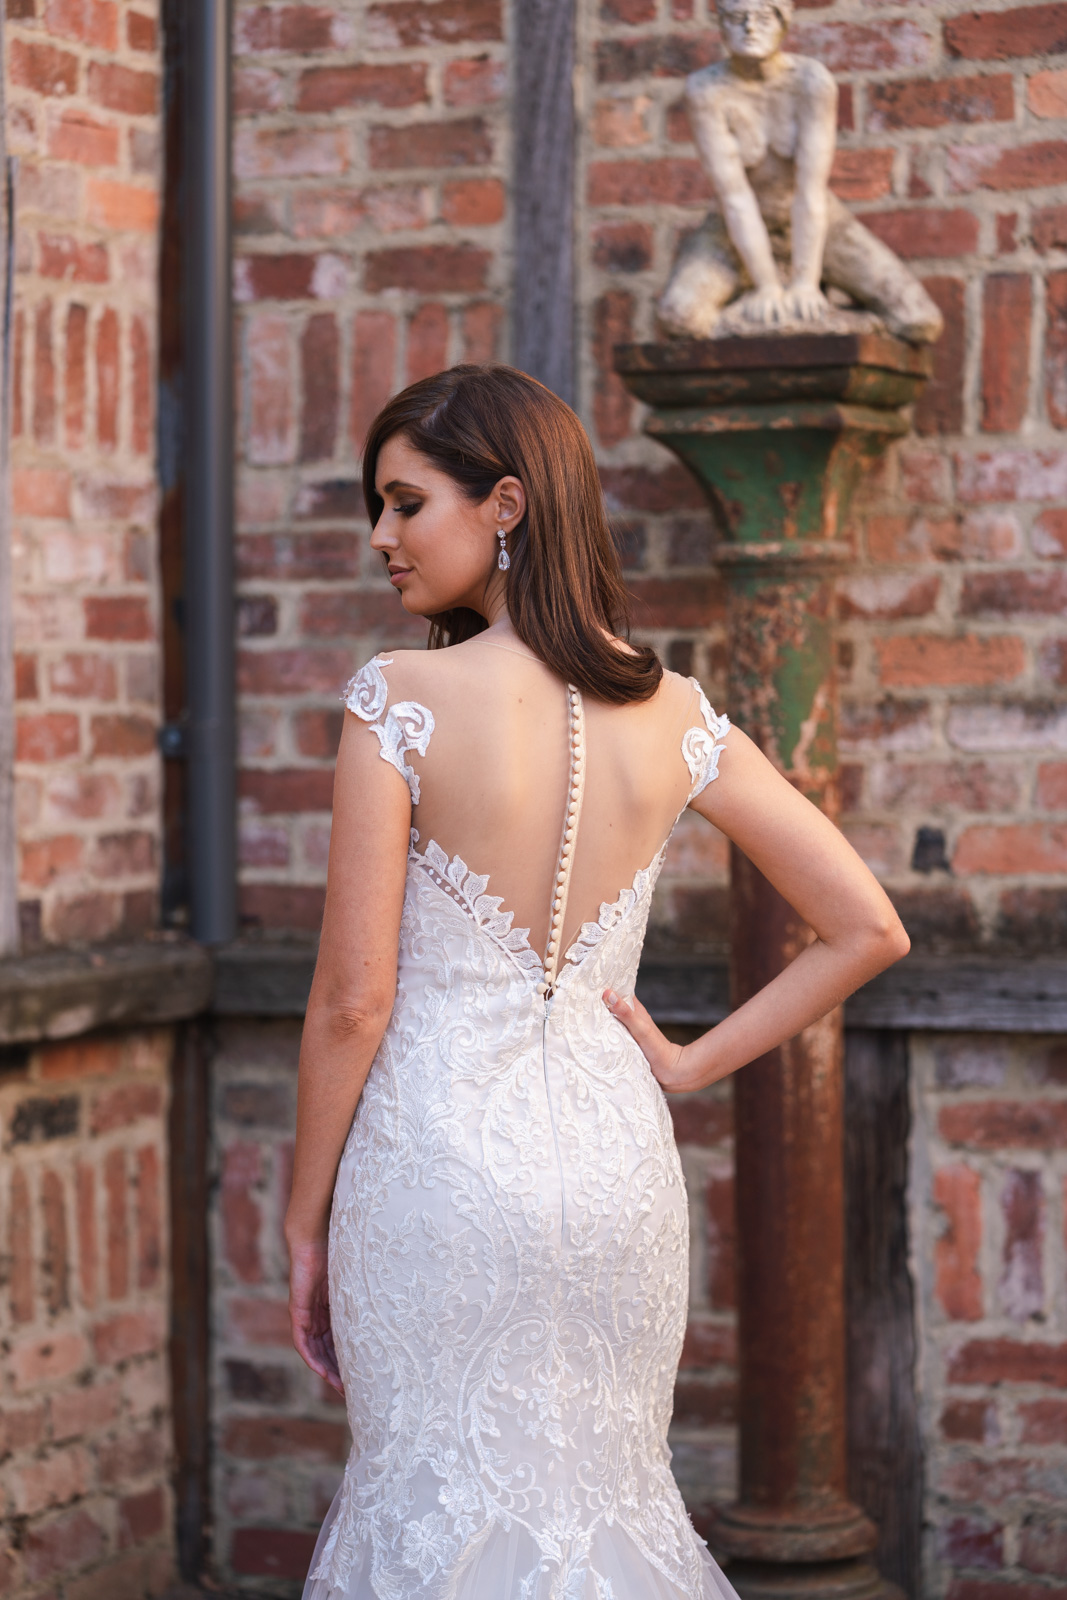  Lace Wedding Dresses Melbourne of the decade The ultimate guide 